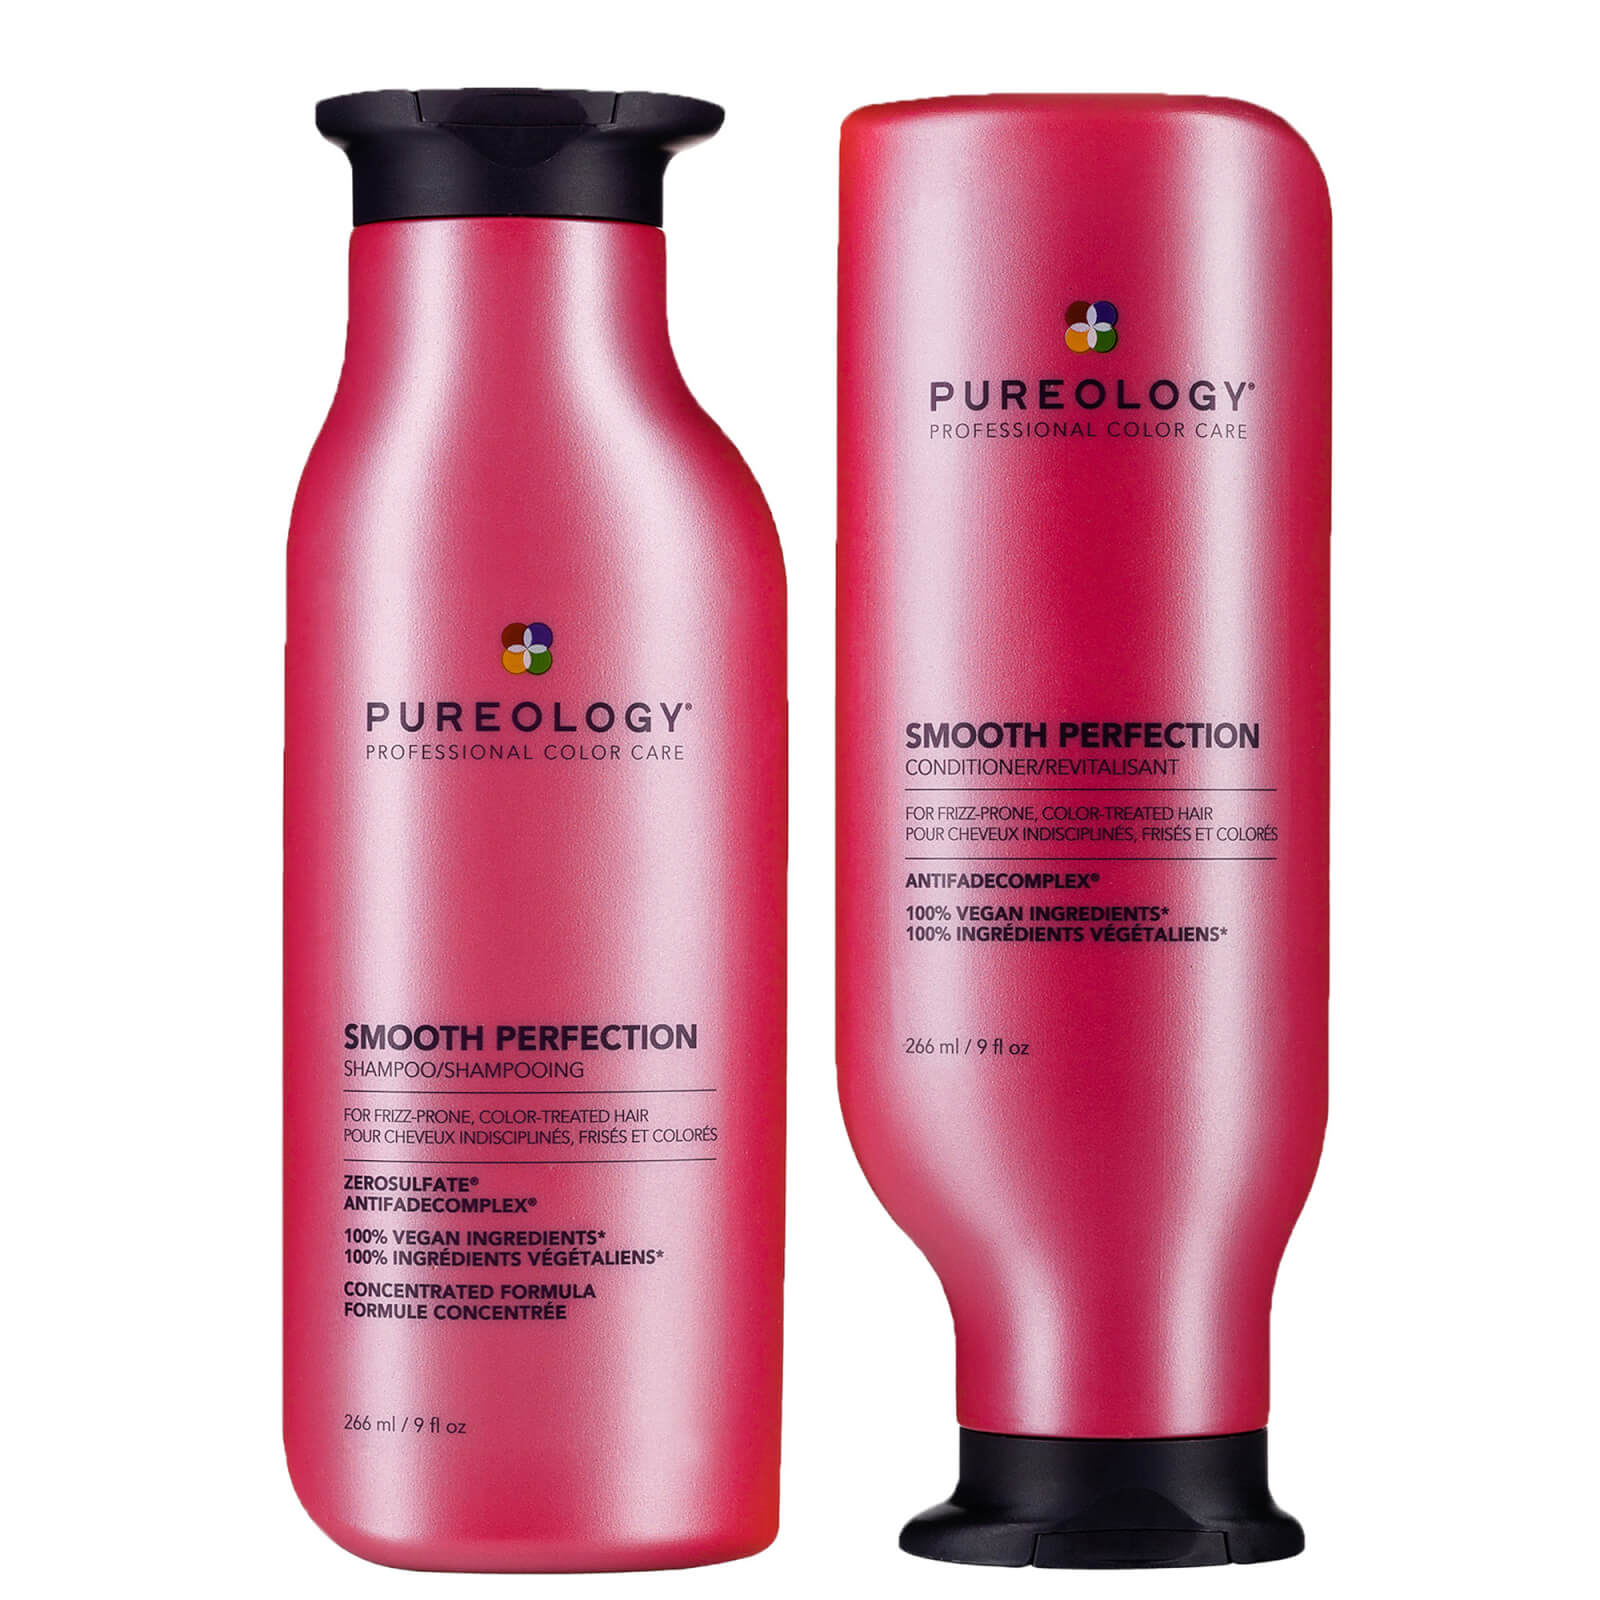 Pureology Smooth Perfection Shampoo and Conditioner Routine For Frizz Prone, Colour Treated Hair 266